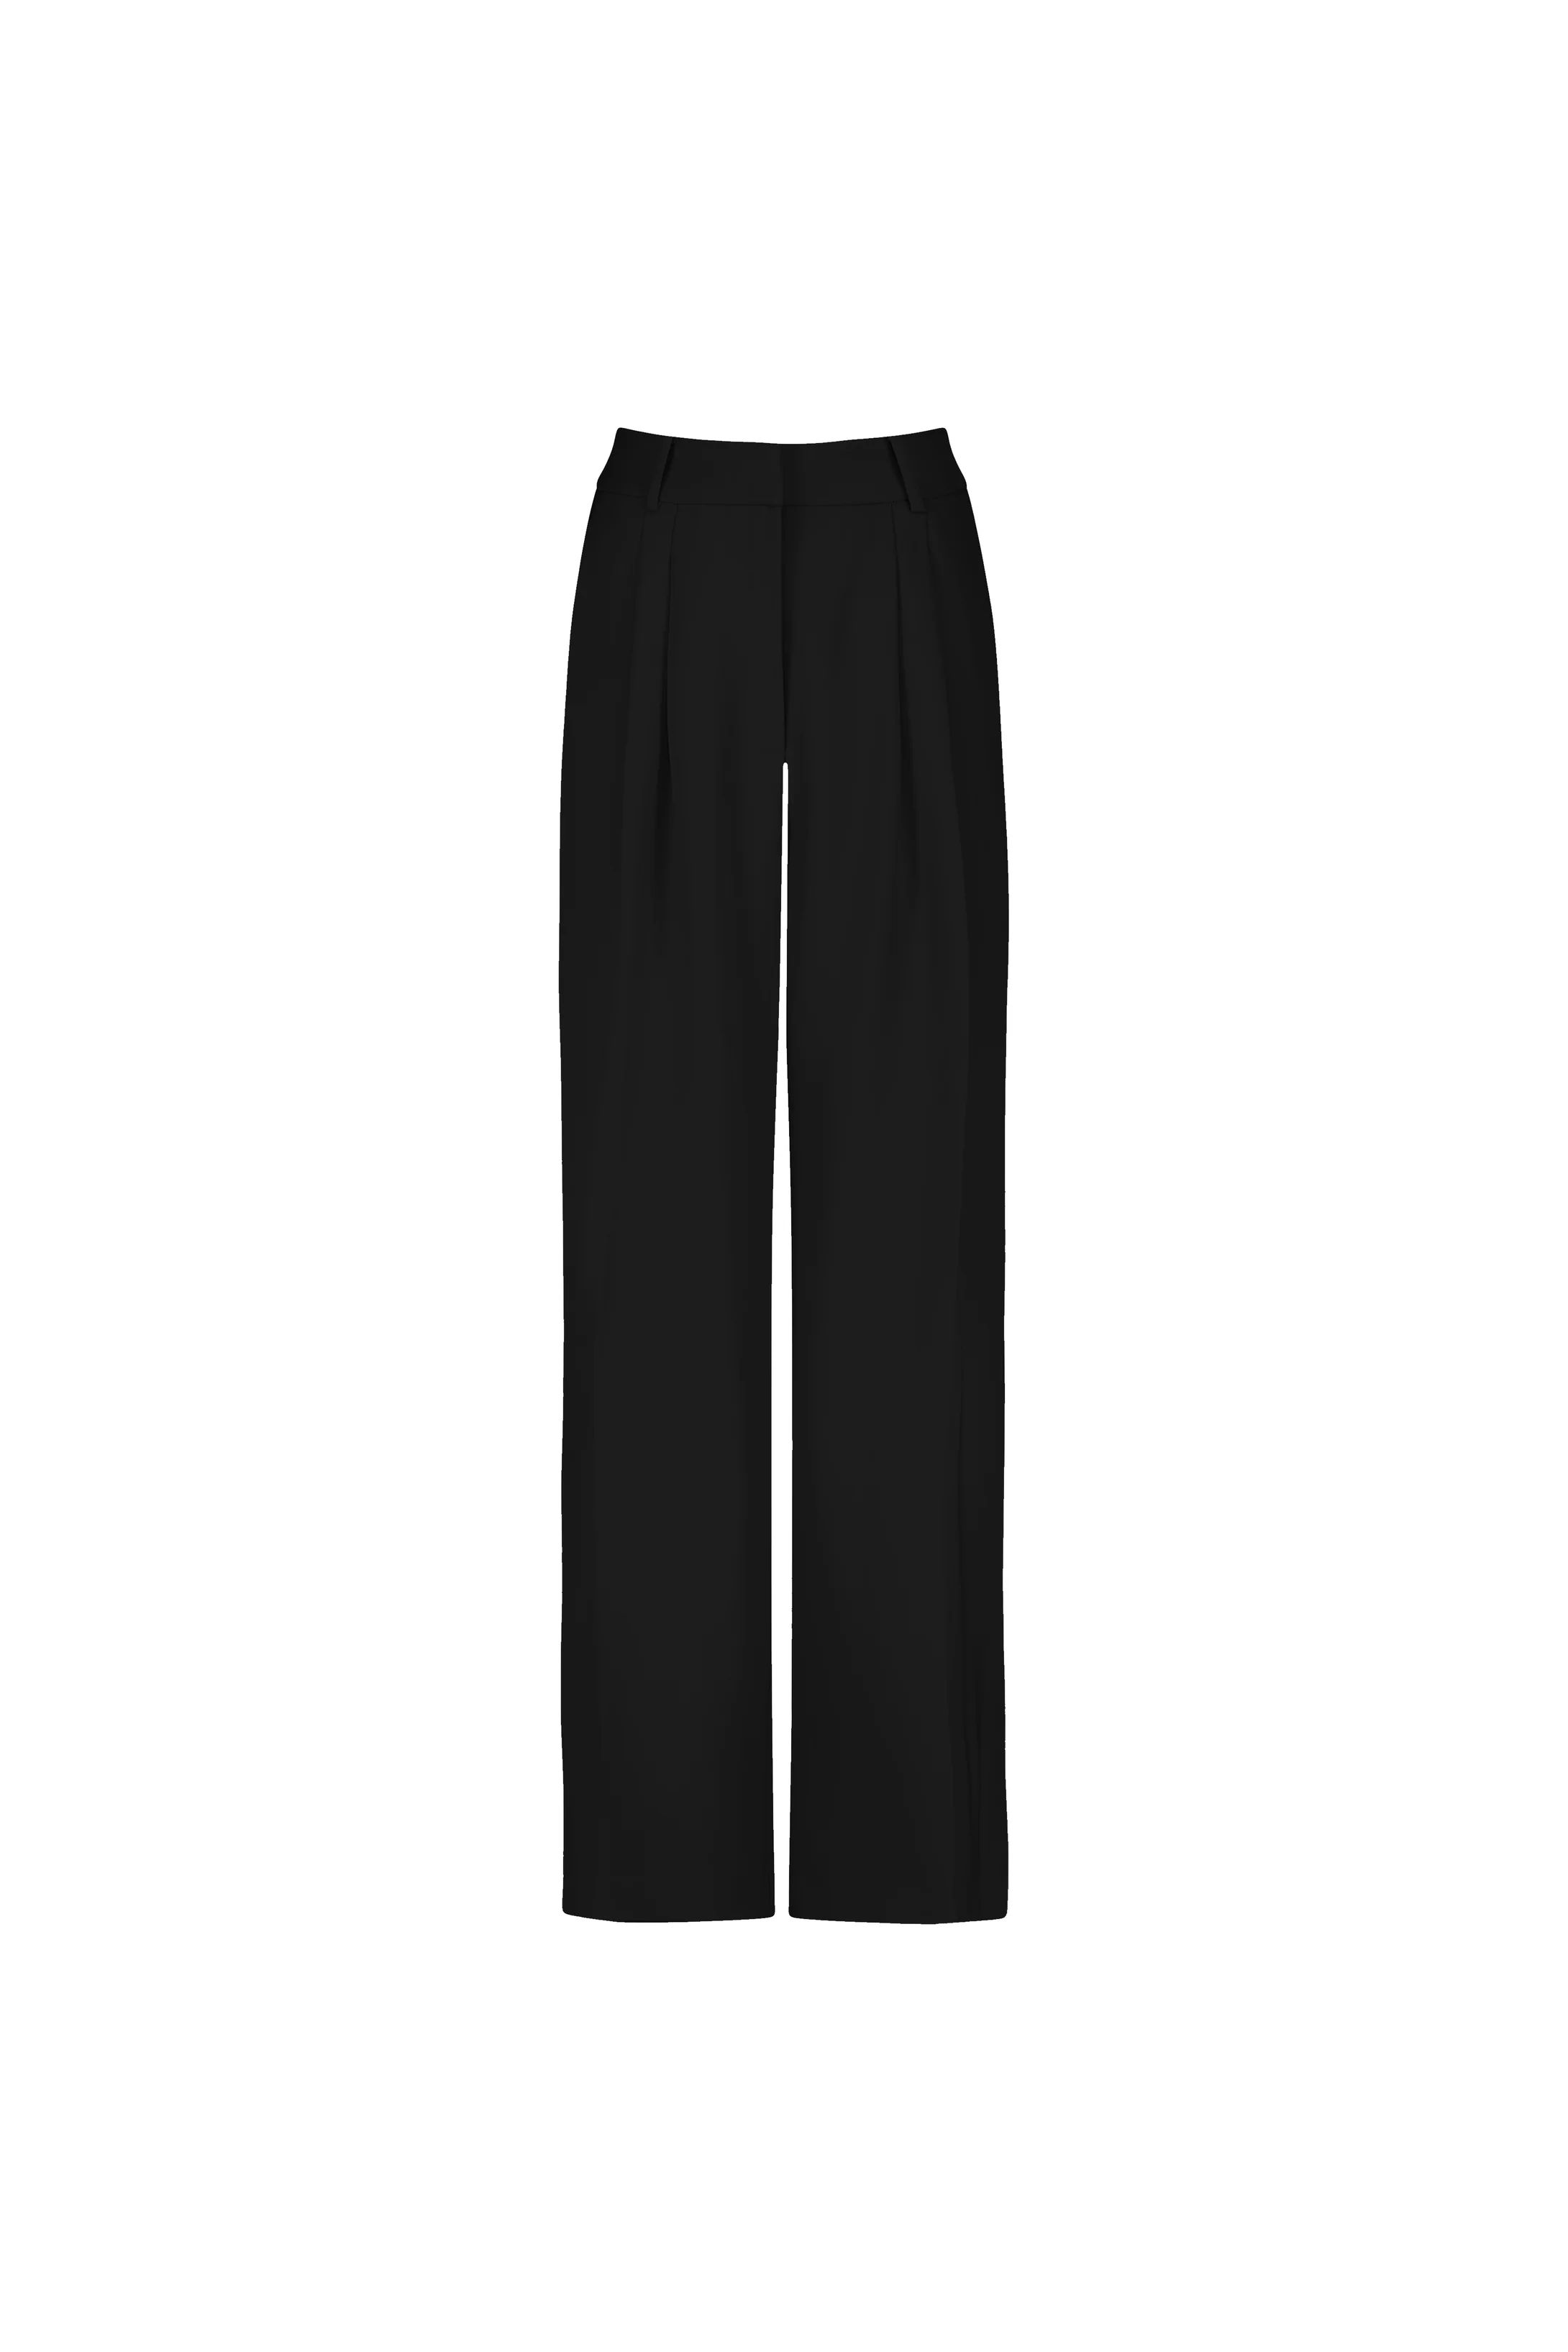 Twill Wide Leg Trouser Pant | MAYSON the label